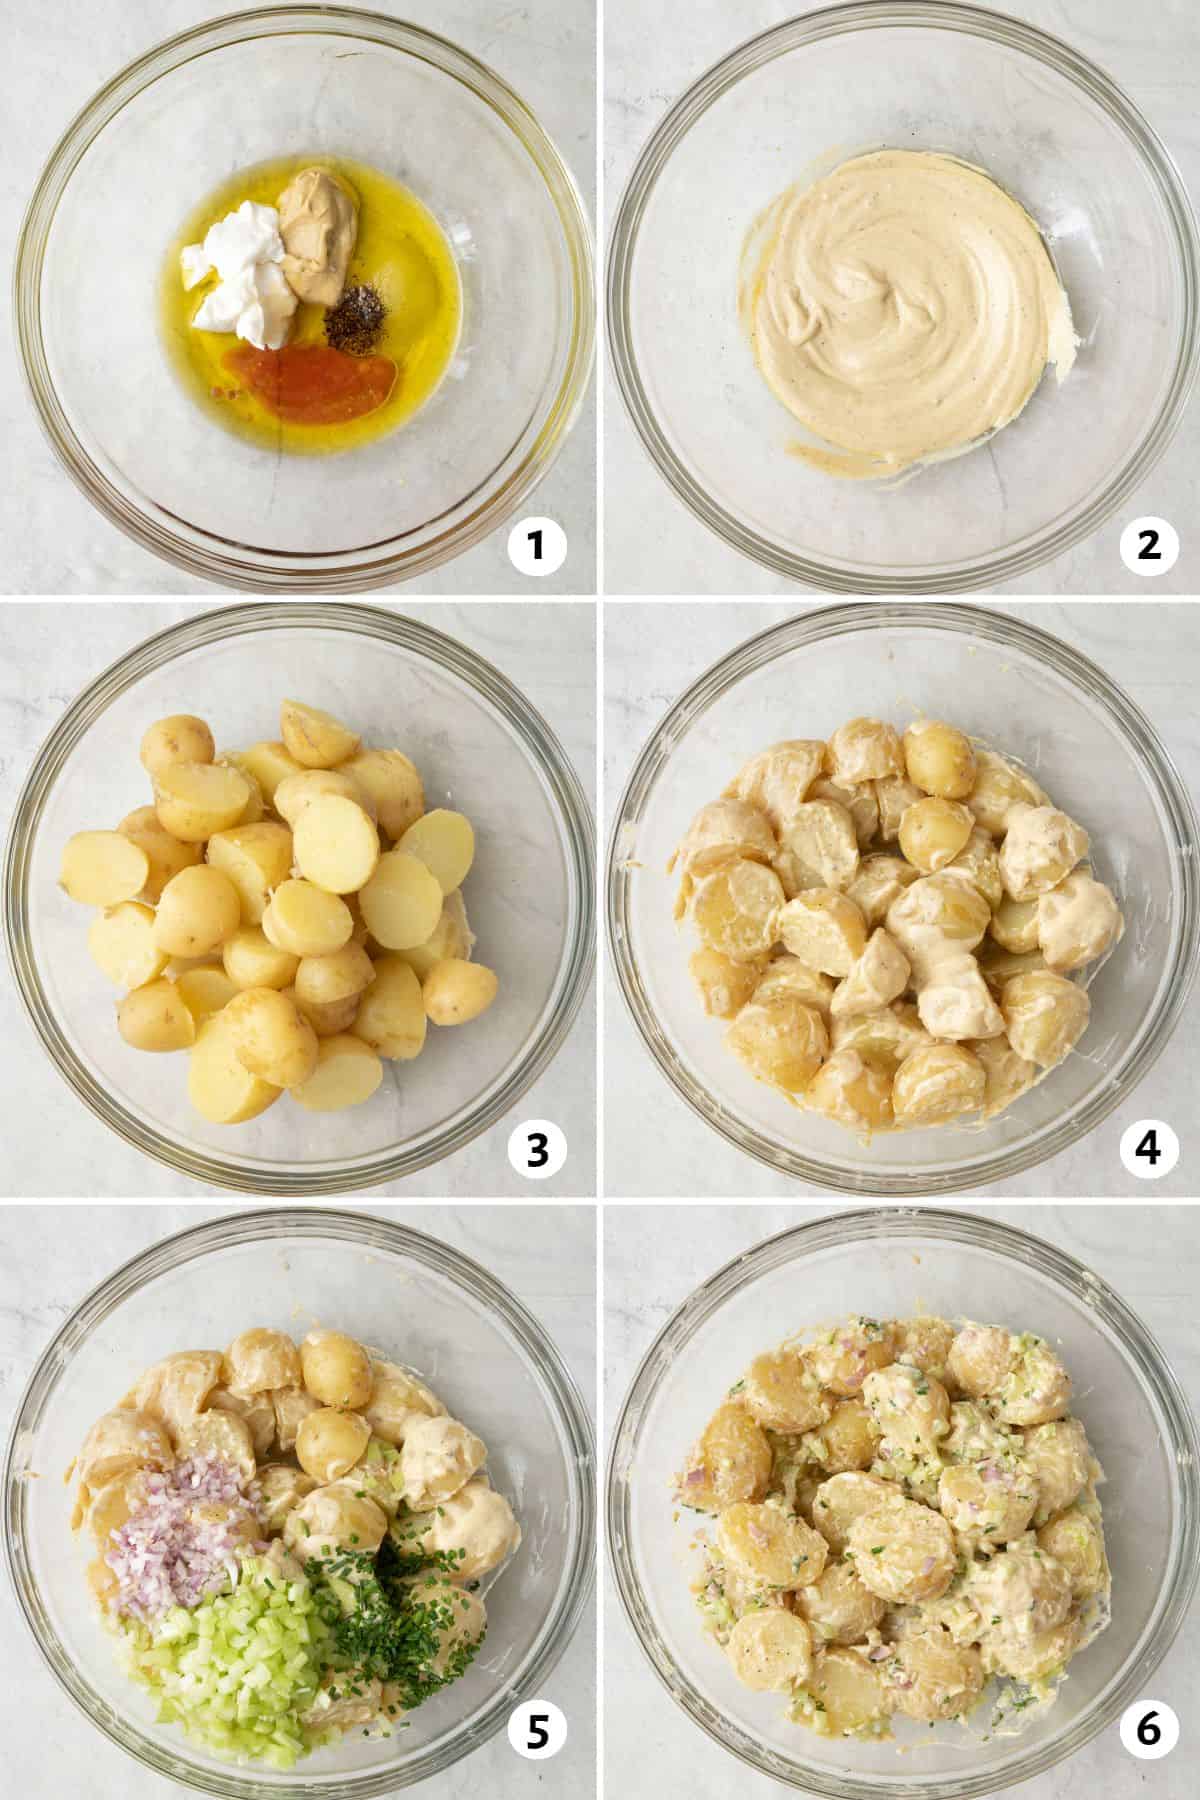 6 image collage making recipe in one bowl: 1- dressing ingredients added, 2- after combined, 3- cooked potatoes added on top, 4- after tossed with dressing, 5- remaining ingredients added, and 6- after fully combined.